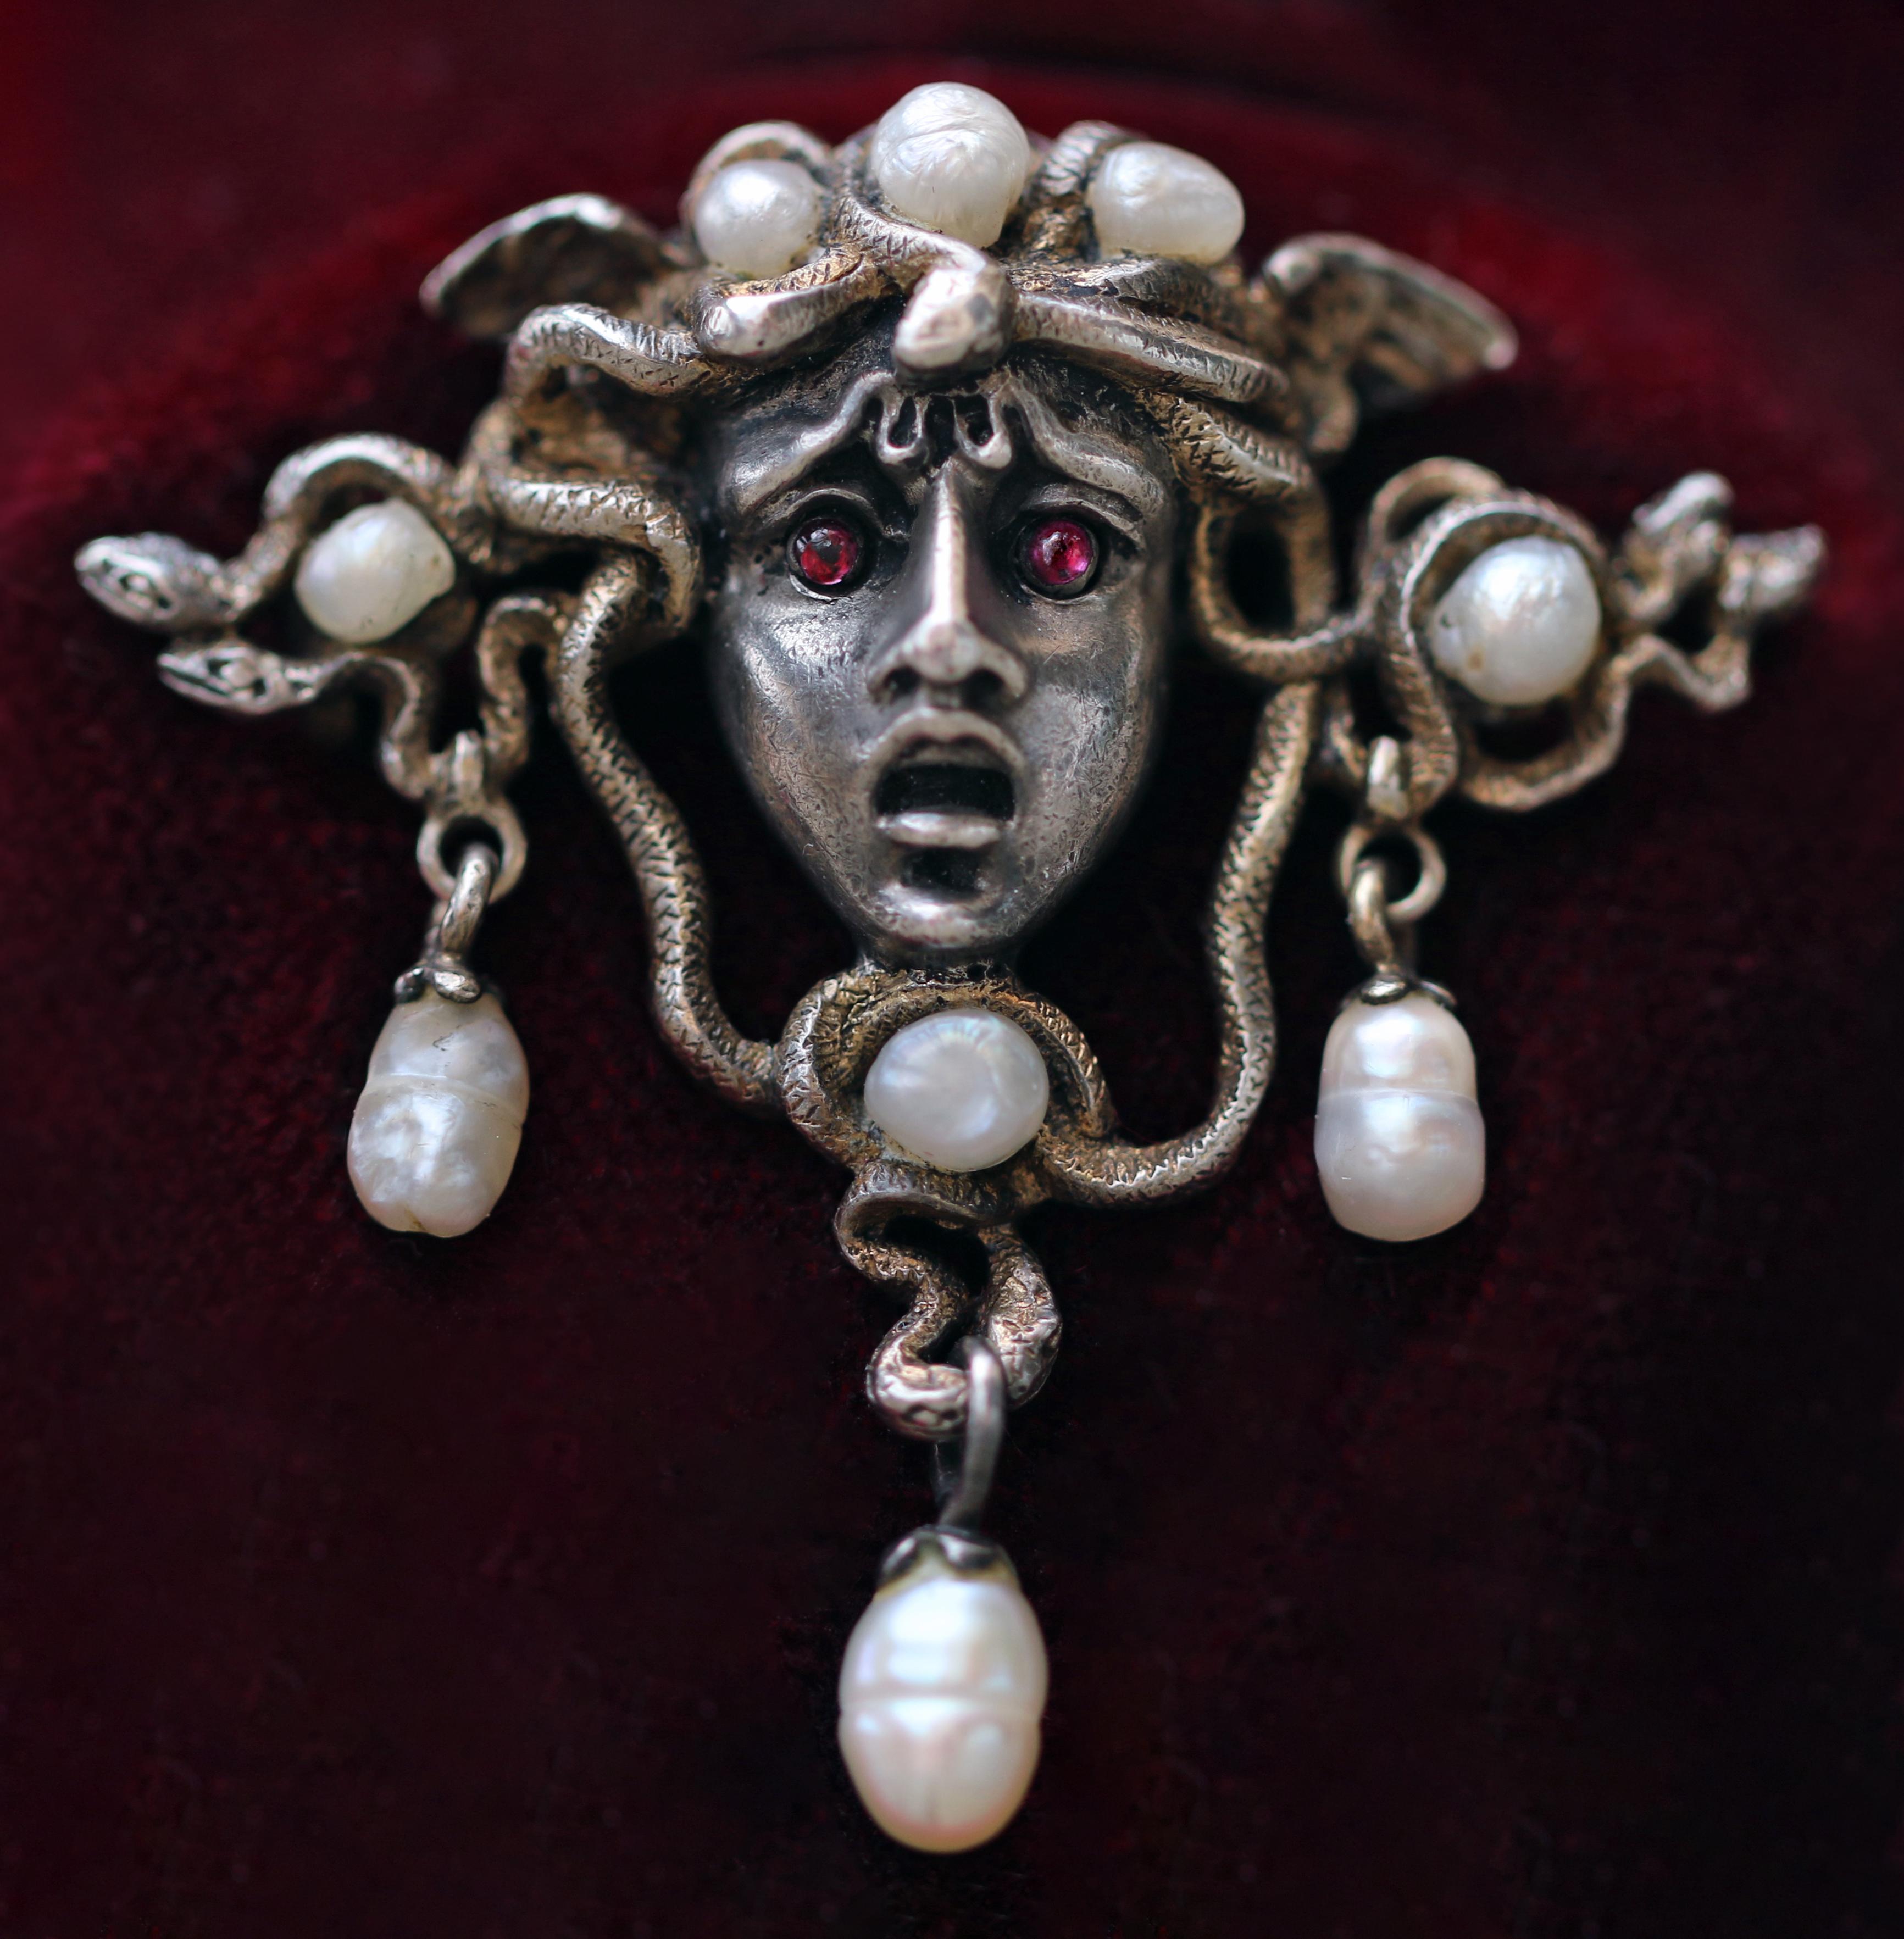 A fabulous example of a 'fin de siècle' symbolist jewel. 
Medusa the original 'Femme Fatale’ is beautifully portrayed in this exquisite brooch. 
The powerful protective significance of the Greek Myth has fascinated artists for millennia. There are